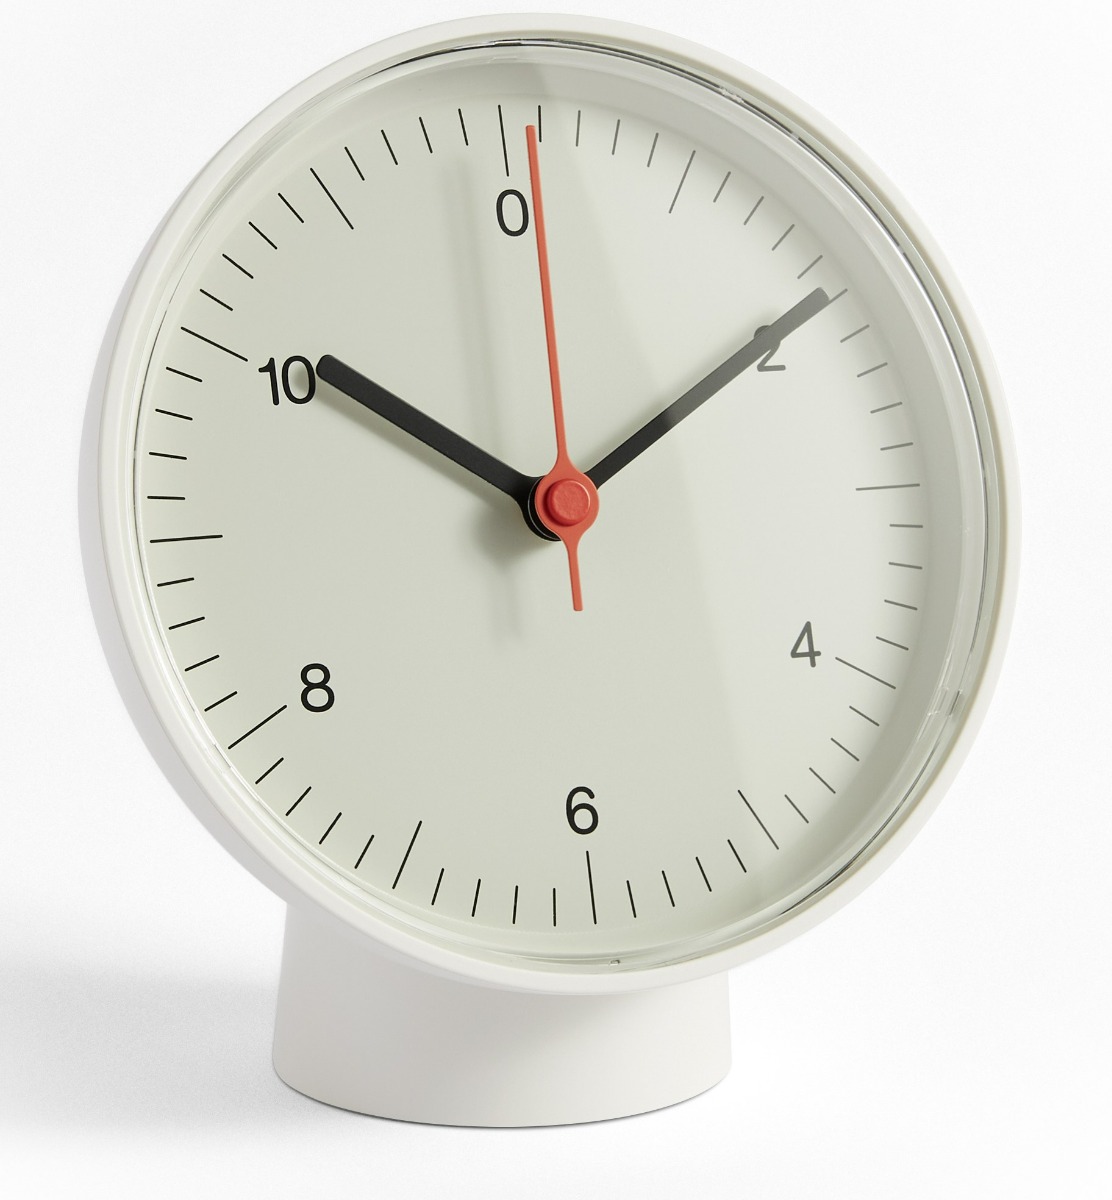 https://www.fundesign.nl/media/catalog/product/a/b/ab311-a605_table_clock_white.jpg